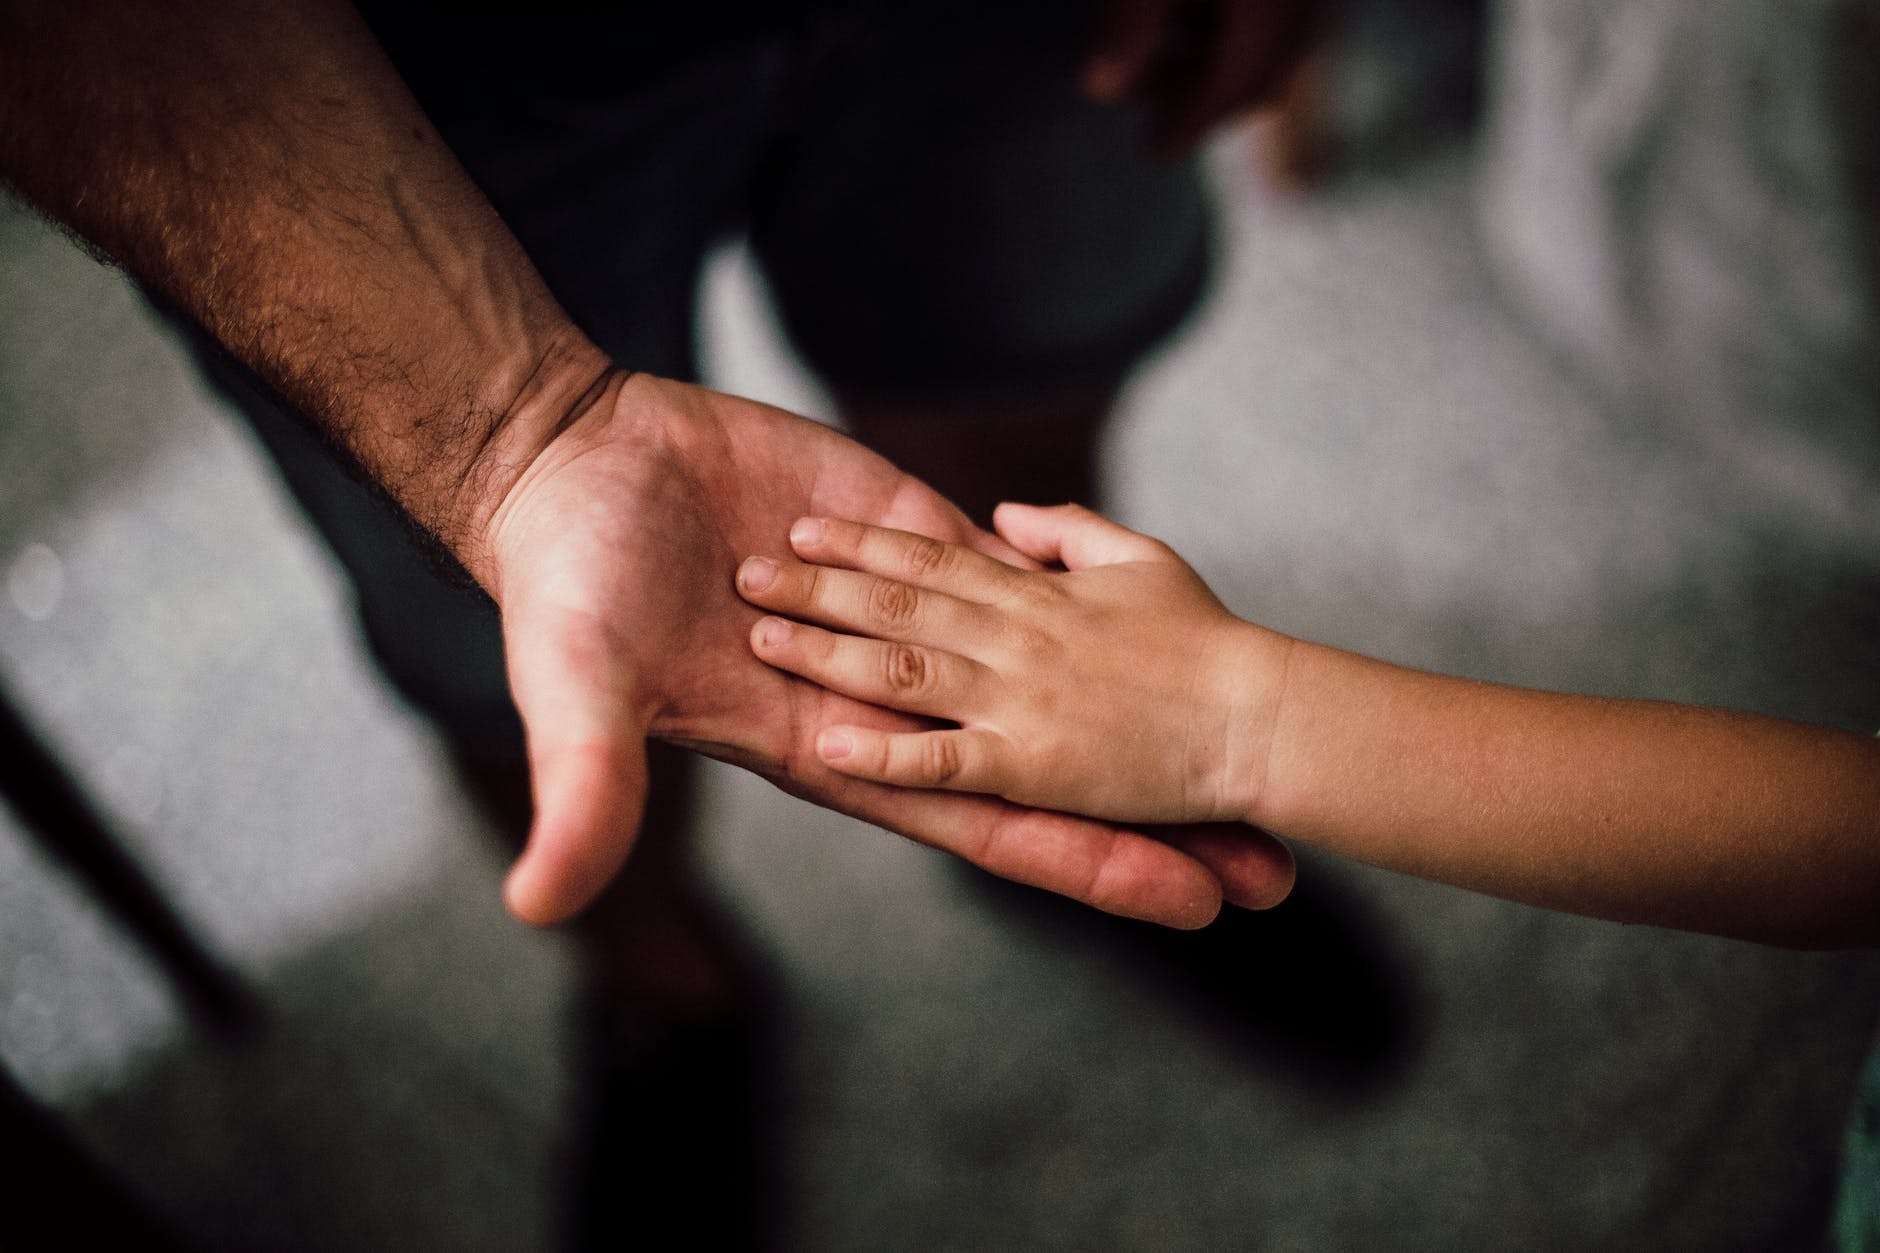 father and child s hands together